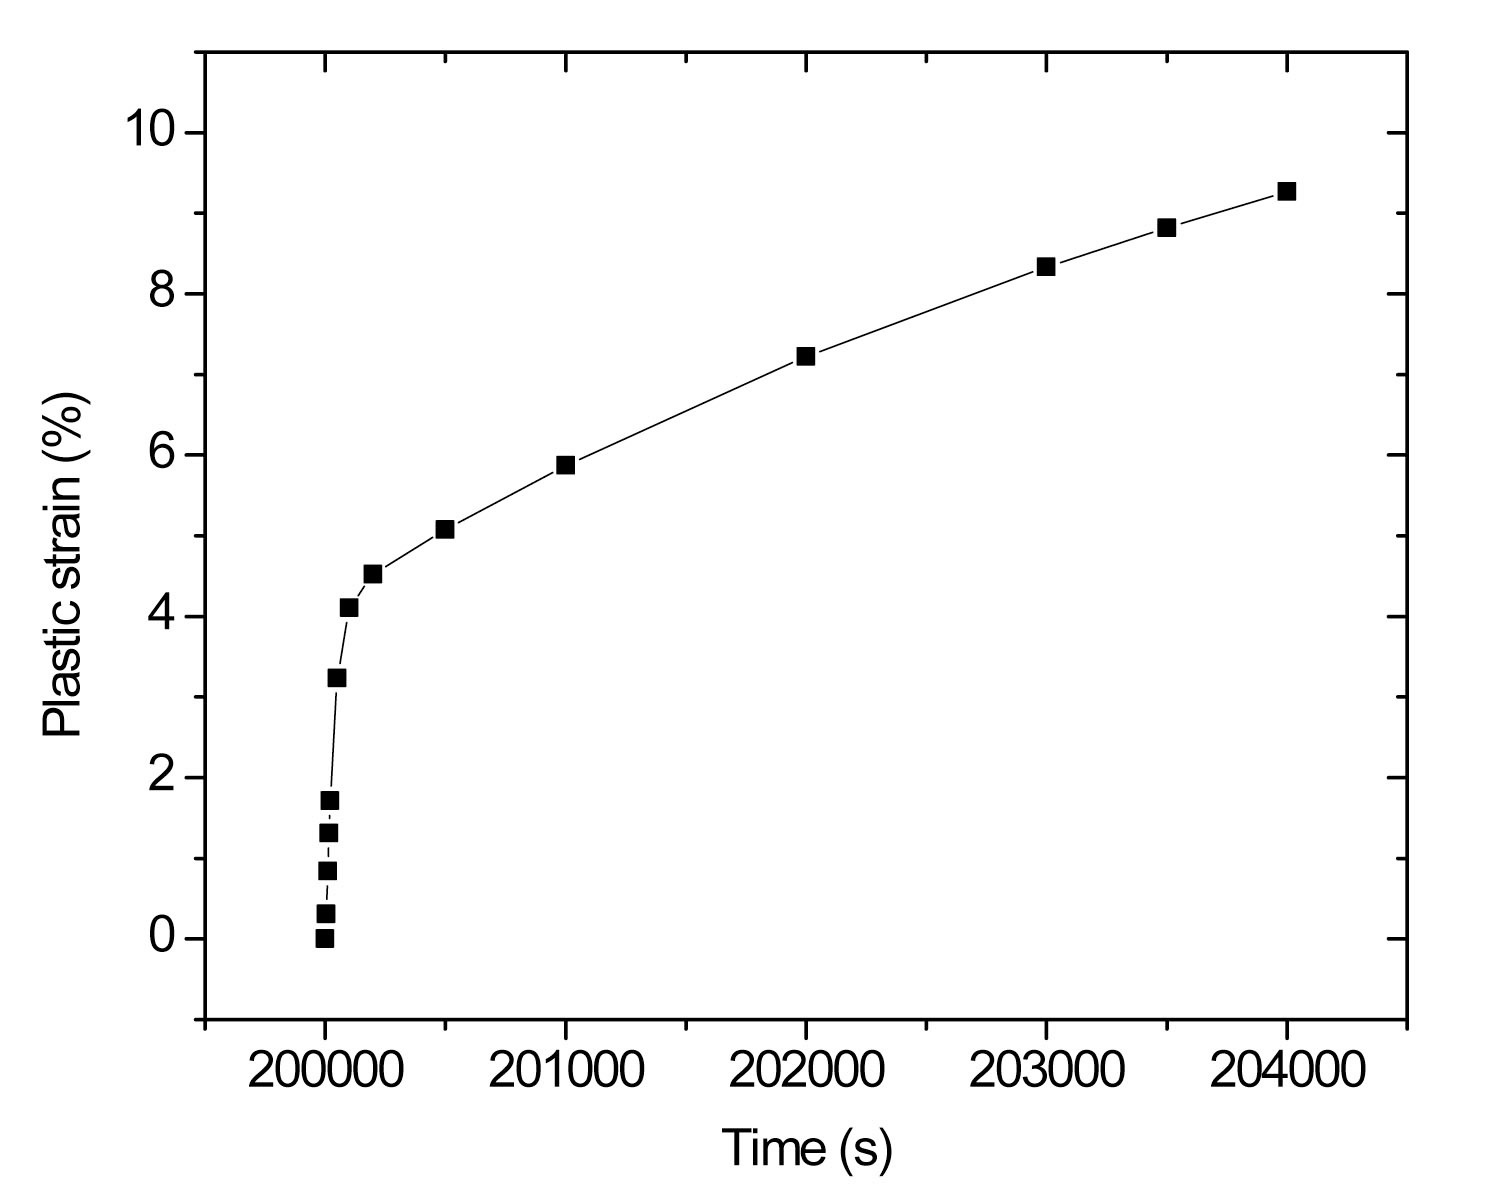 Plastic Strain Accumulation with Time